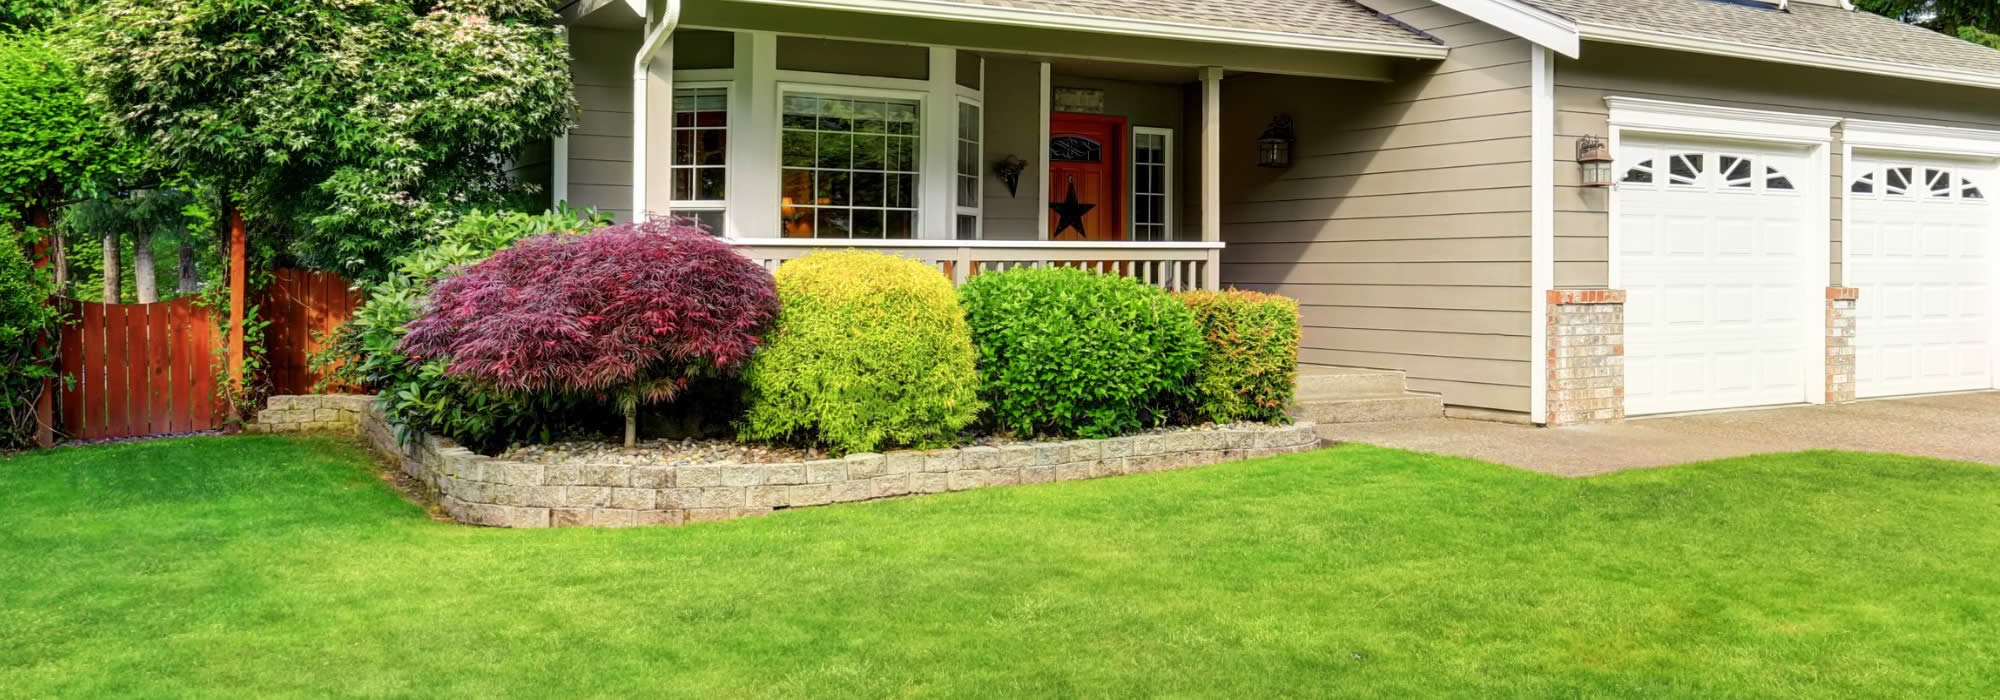 Landscaping Services in Verona